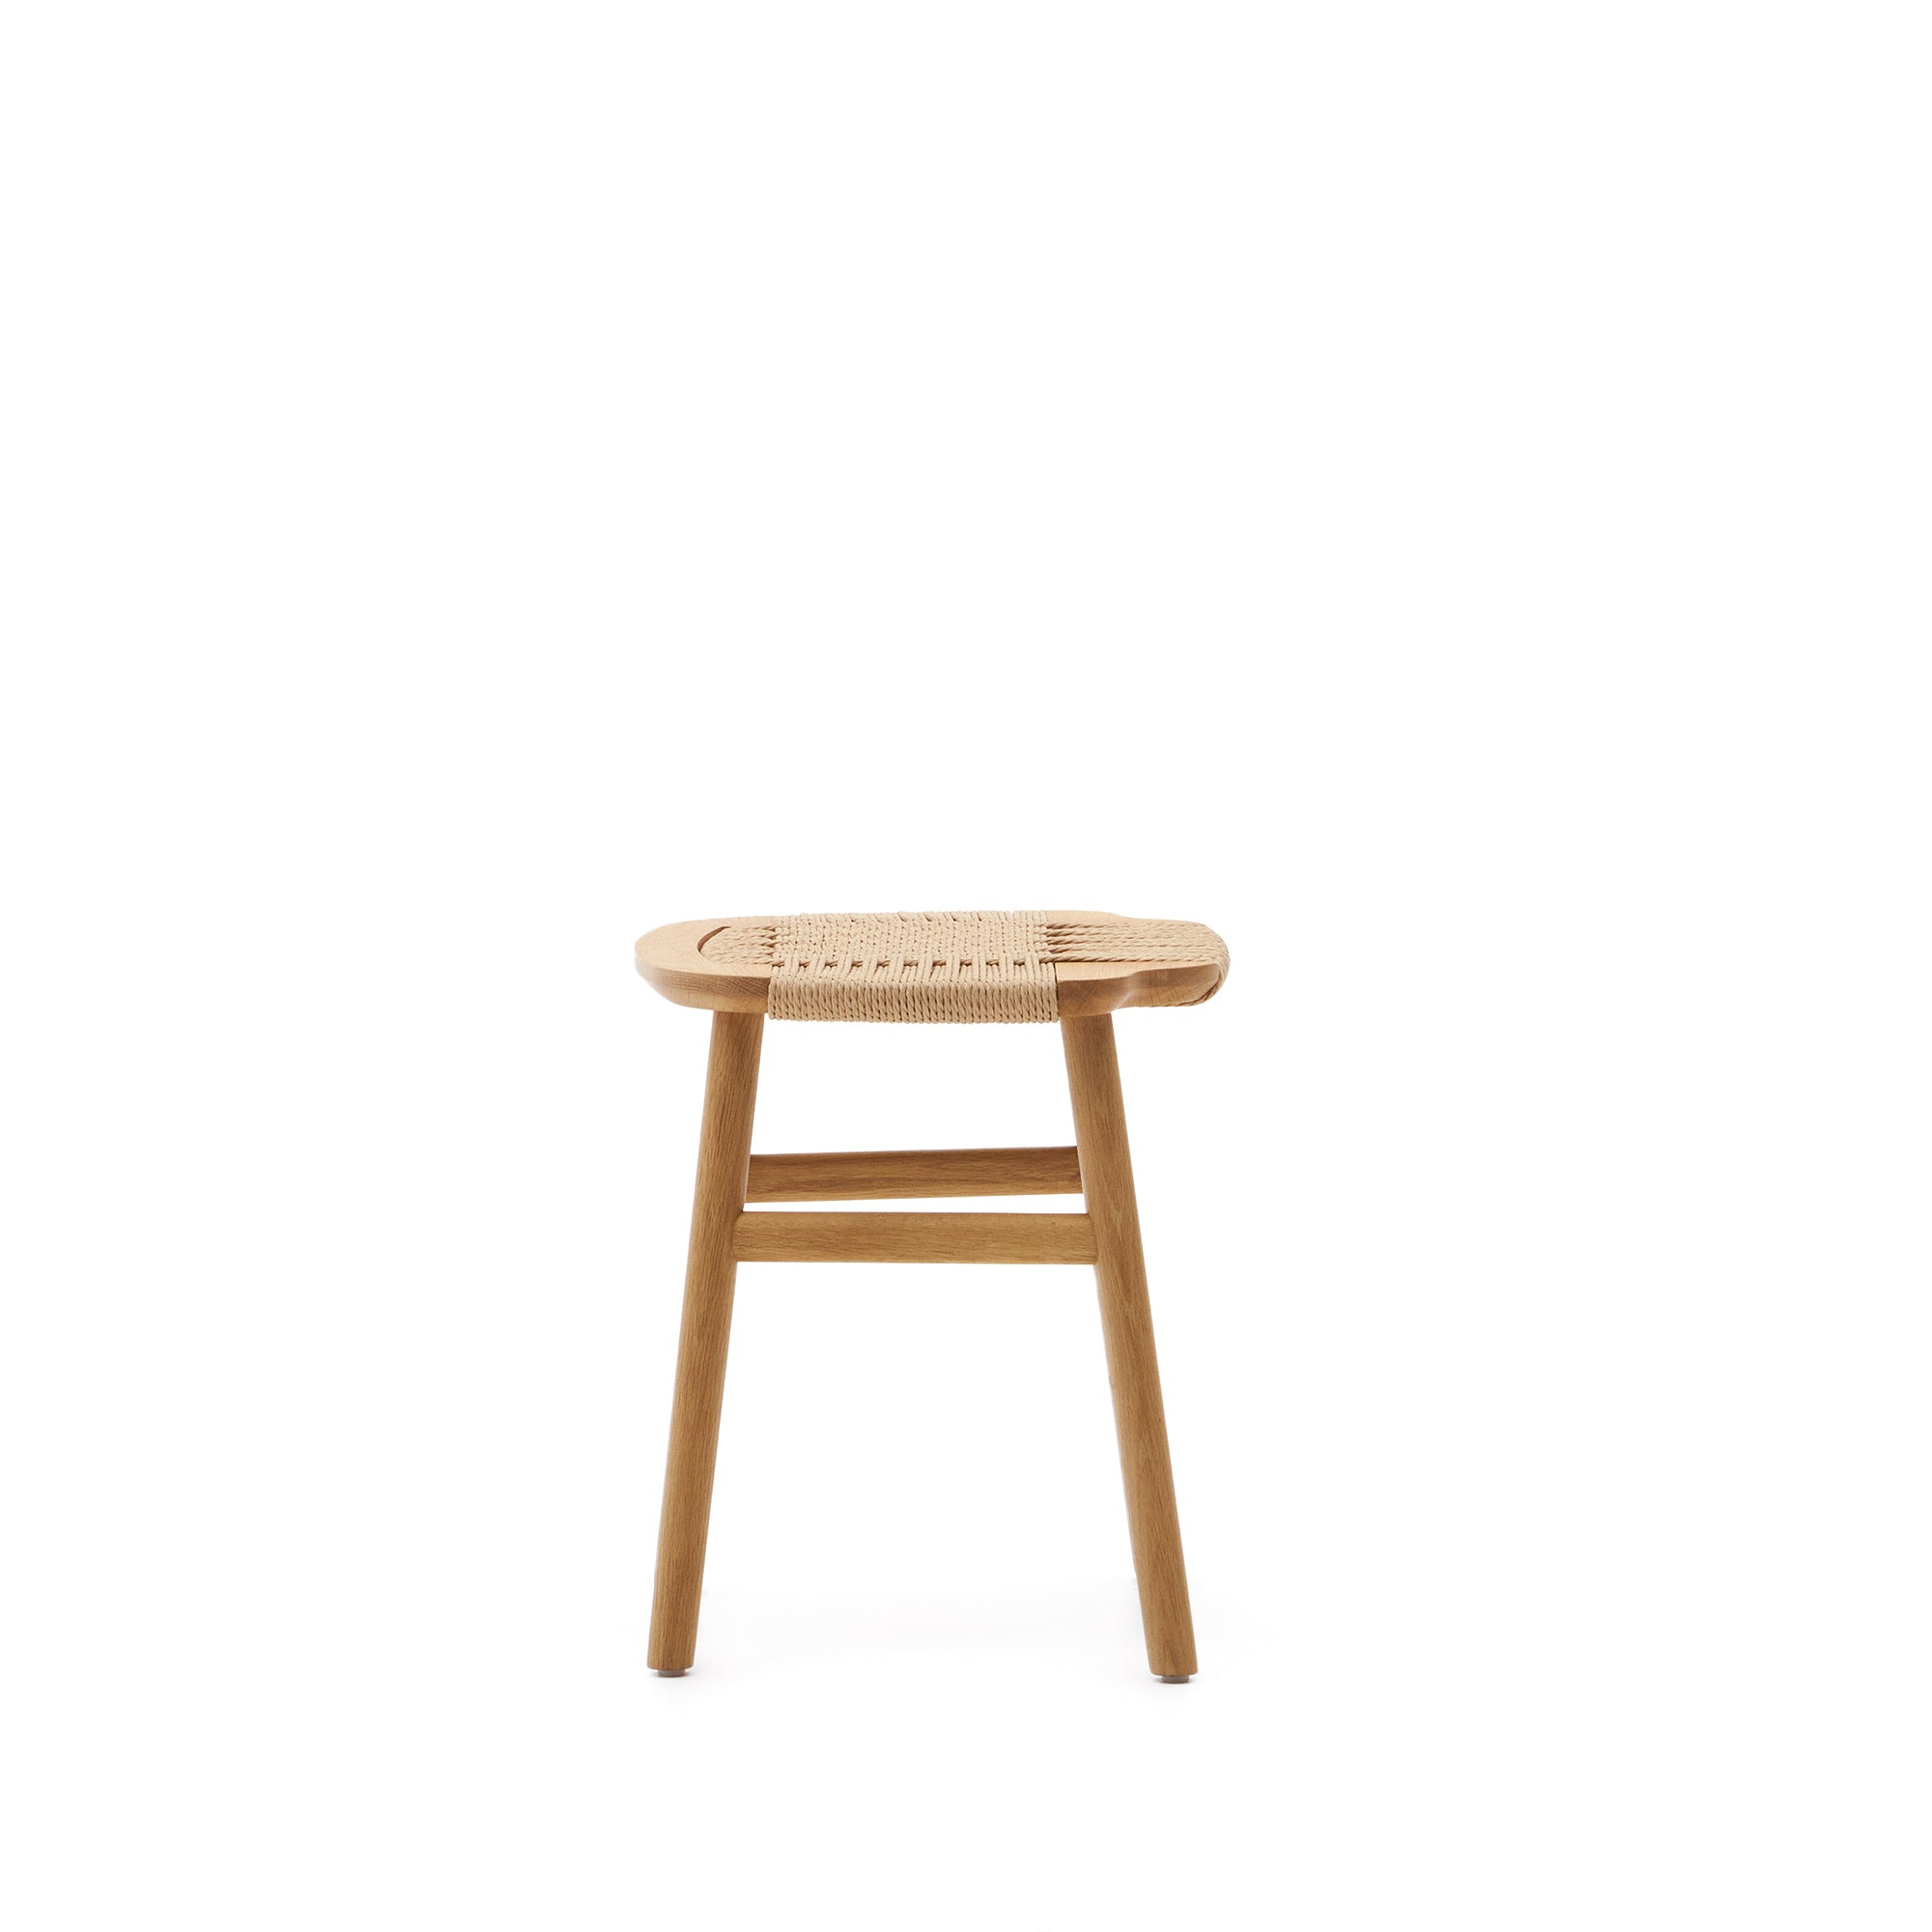 Enit stool made of beige paper cord and solid oak wood with natural finish, 43cm FSC Mix Credit